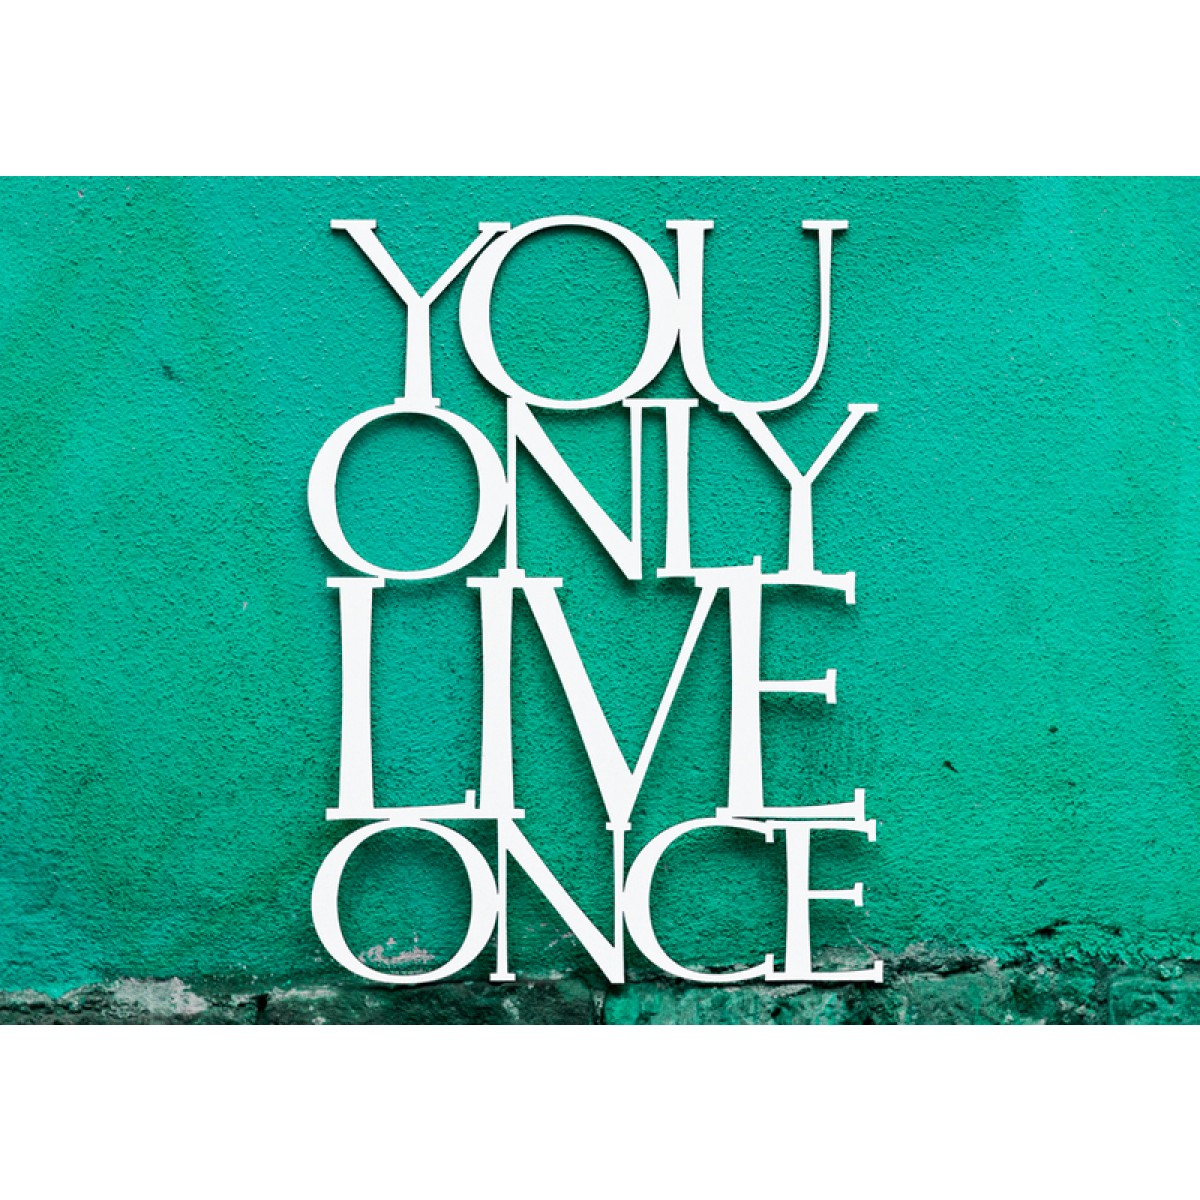 You Only Live Once, 56x42cm